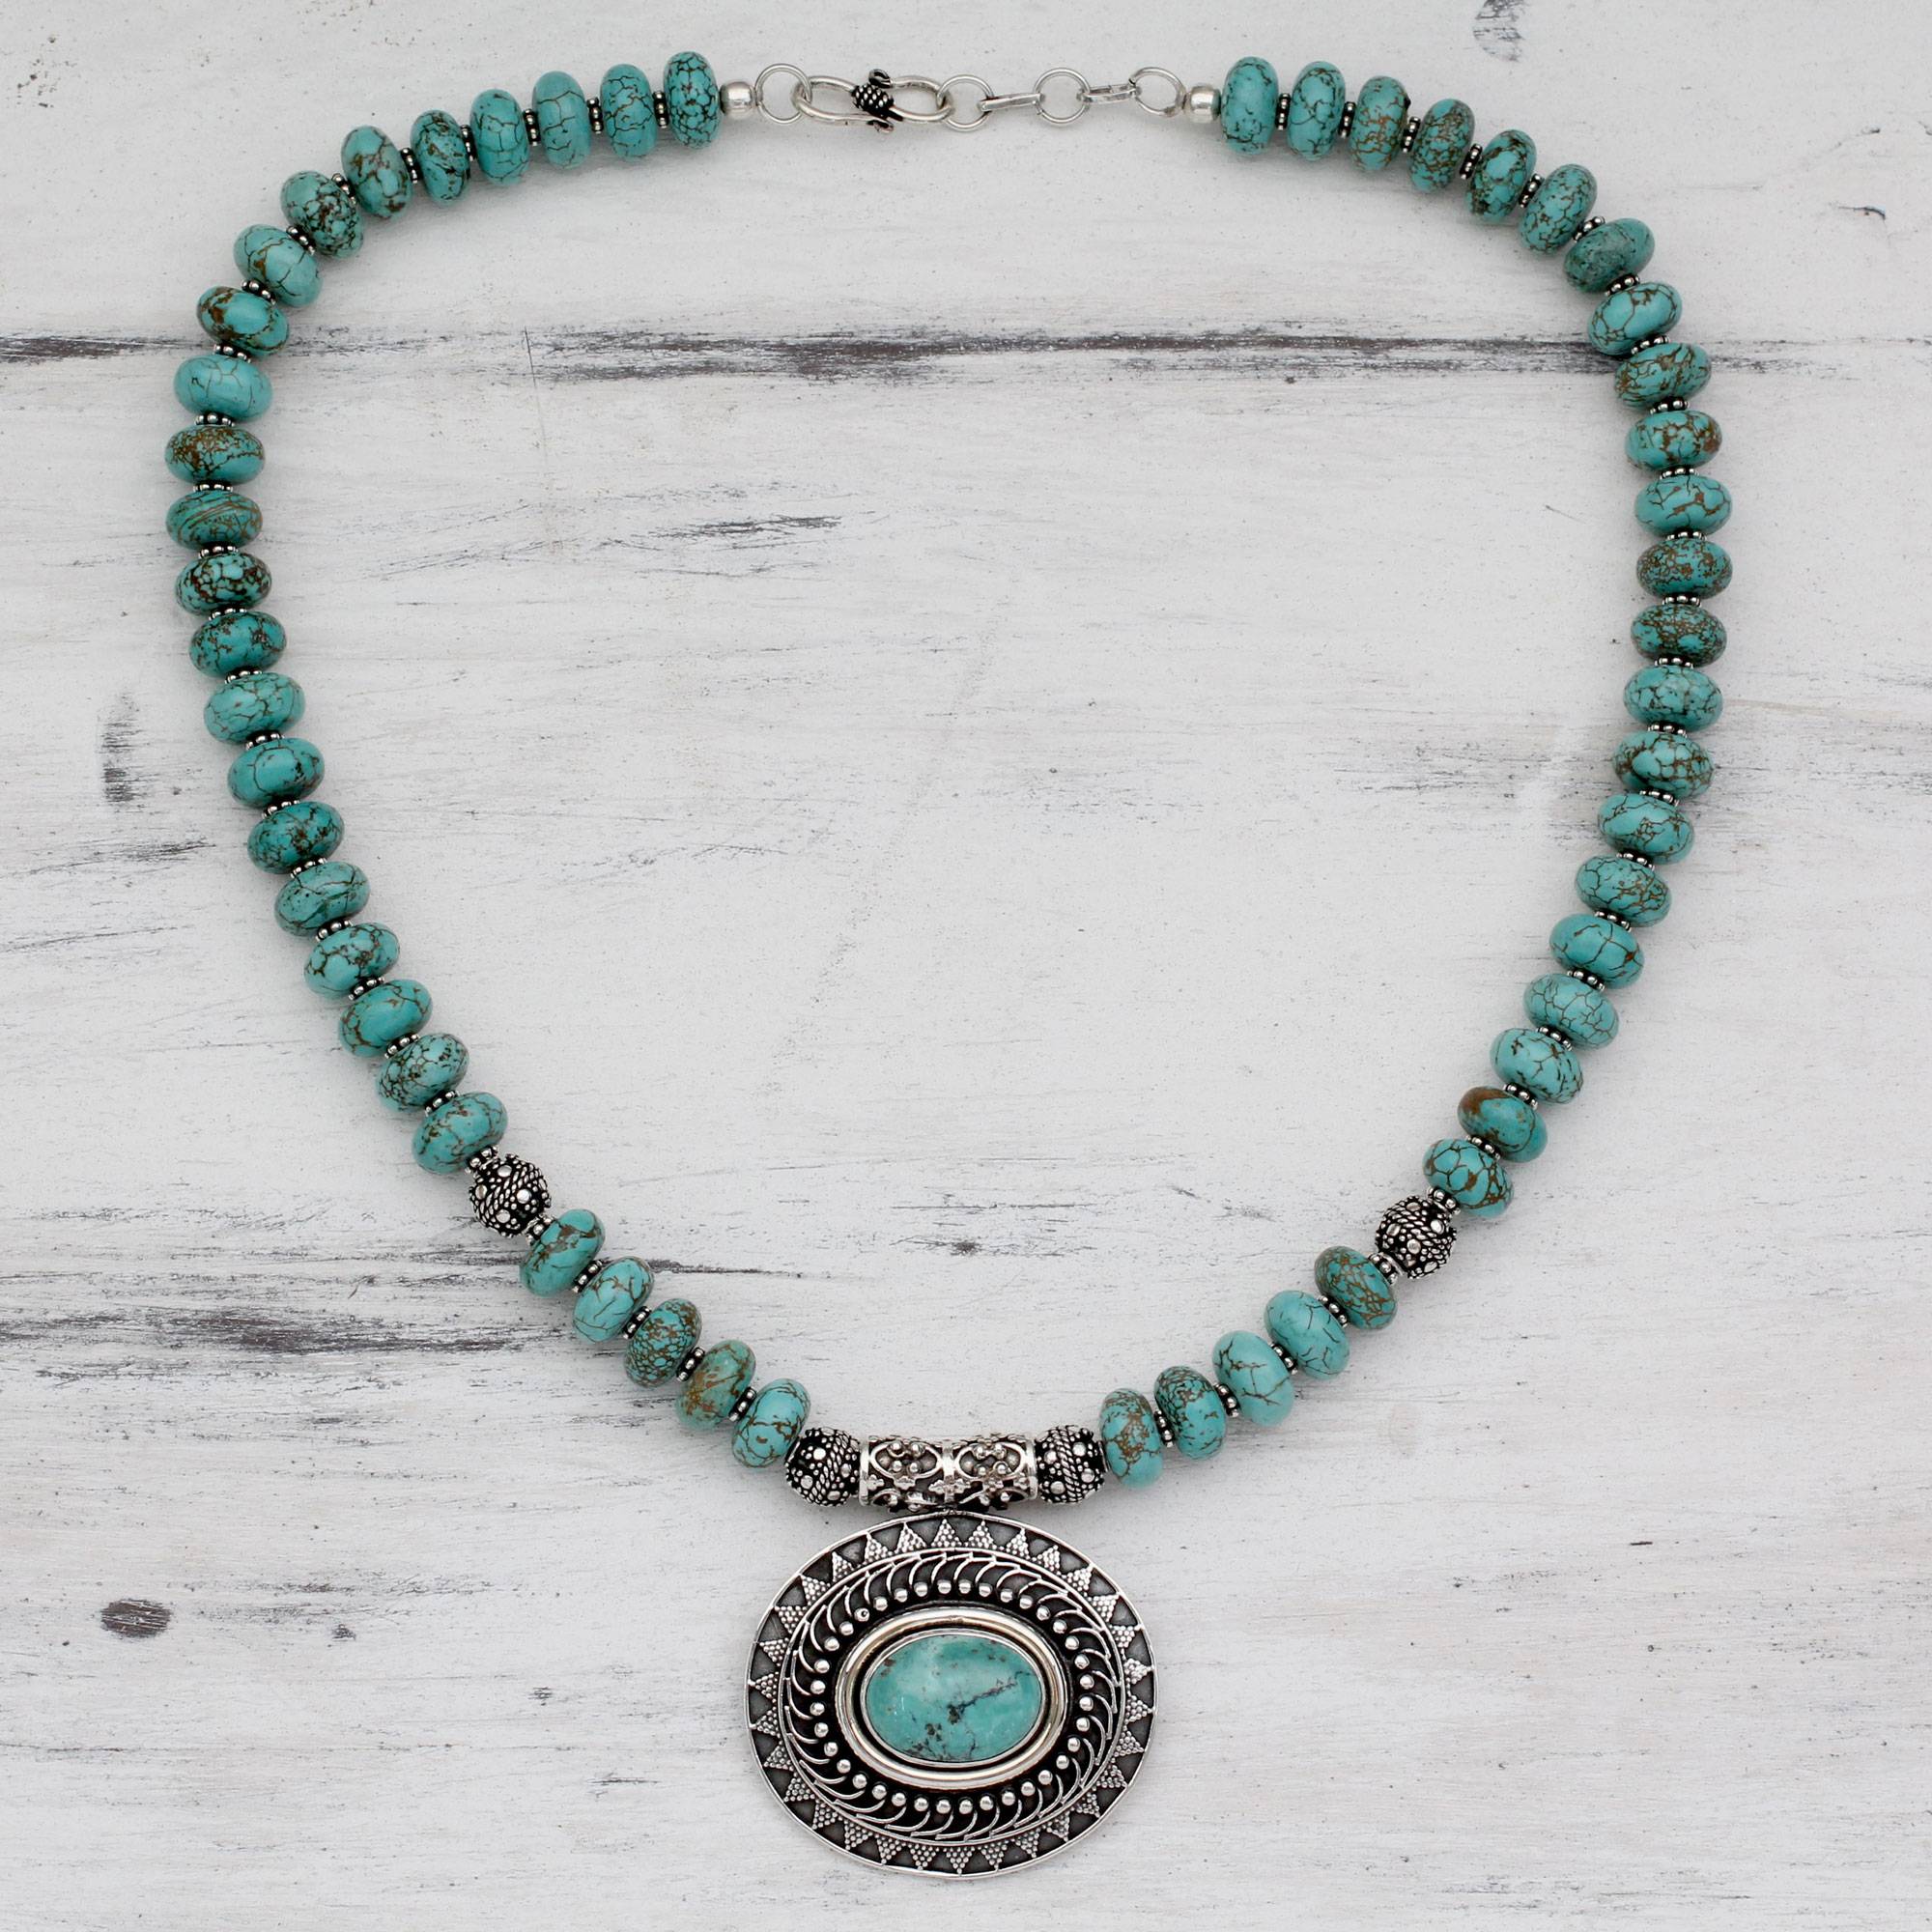 Natural Turquoise Necklace with Sterling Silver, 'Royal Sky Goddess' Timeless Turquoise Jewelry